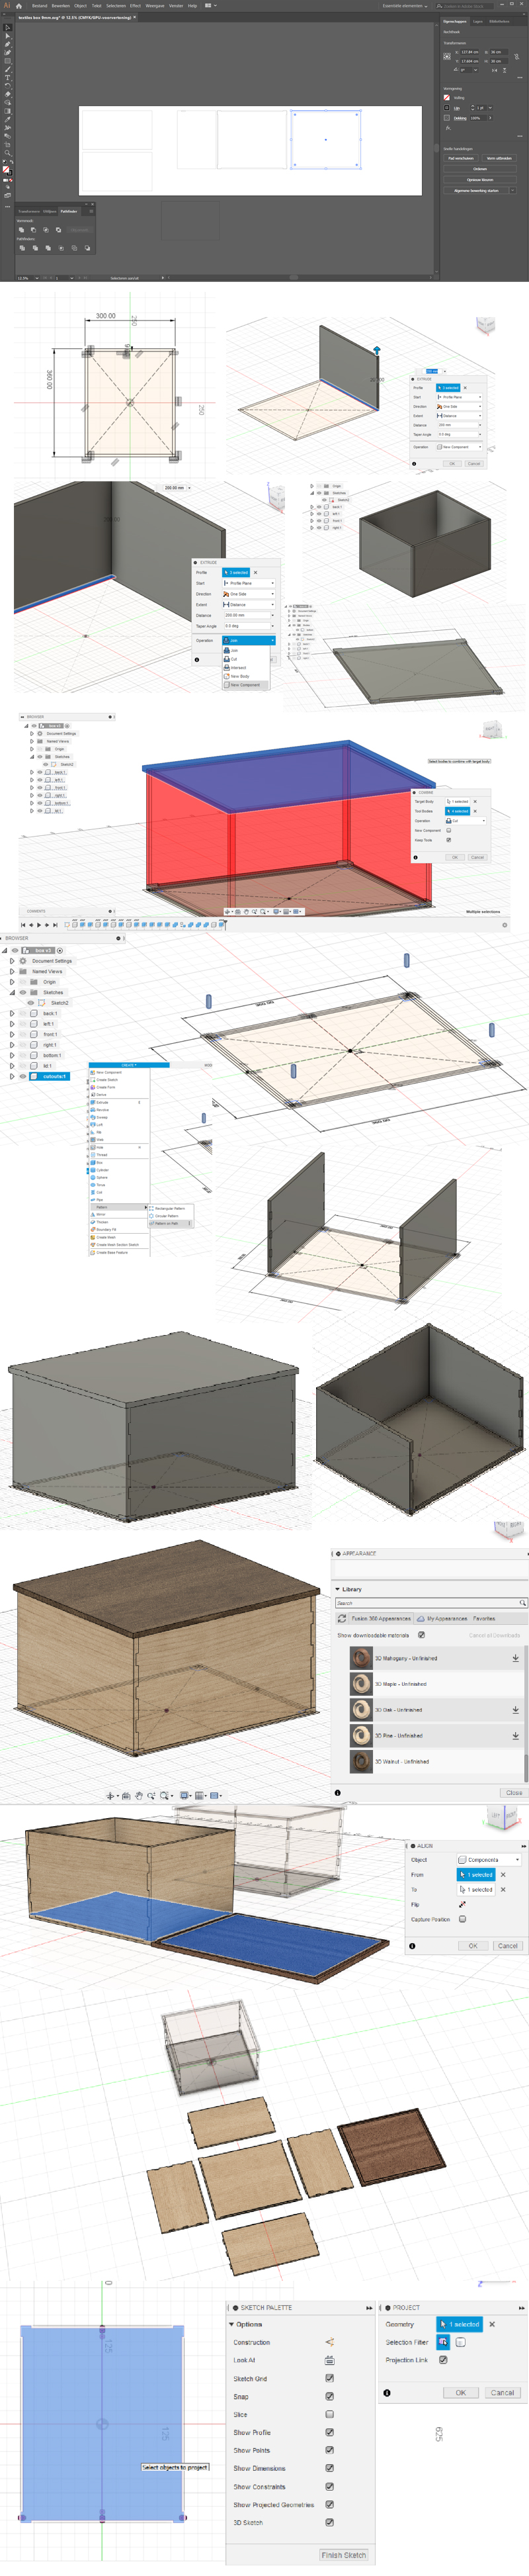 Process of using Fusion360 to create a model of a box